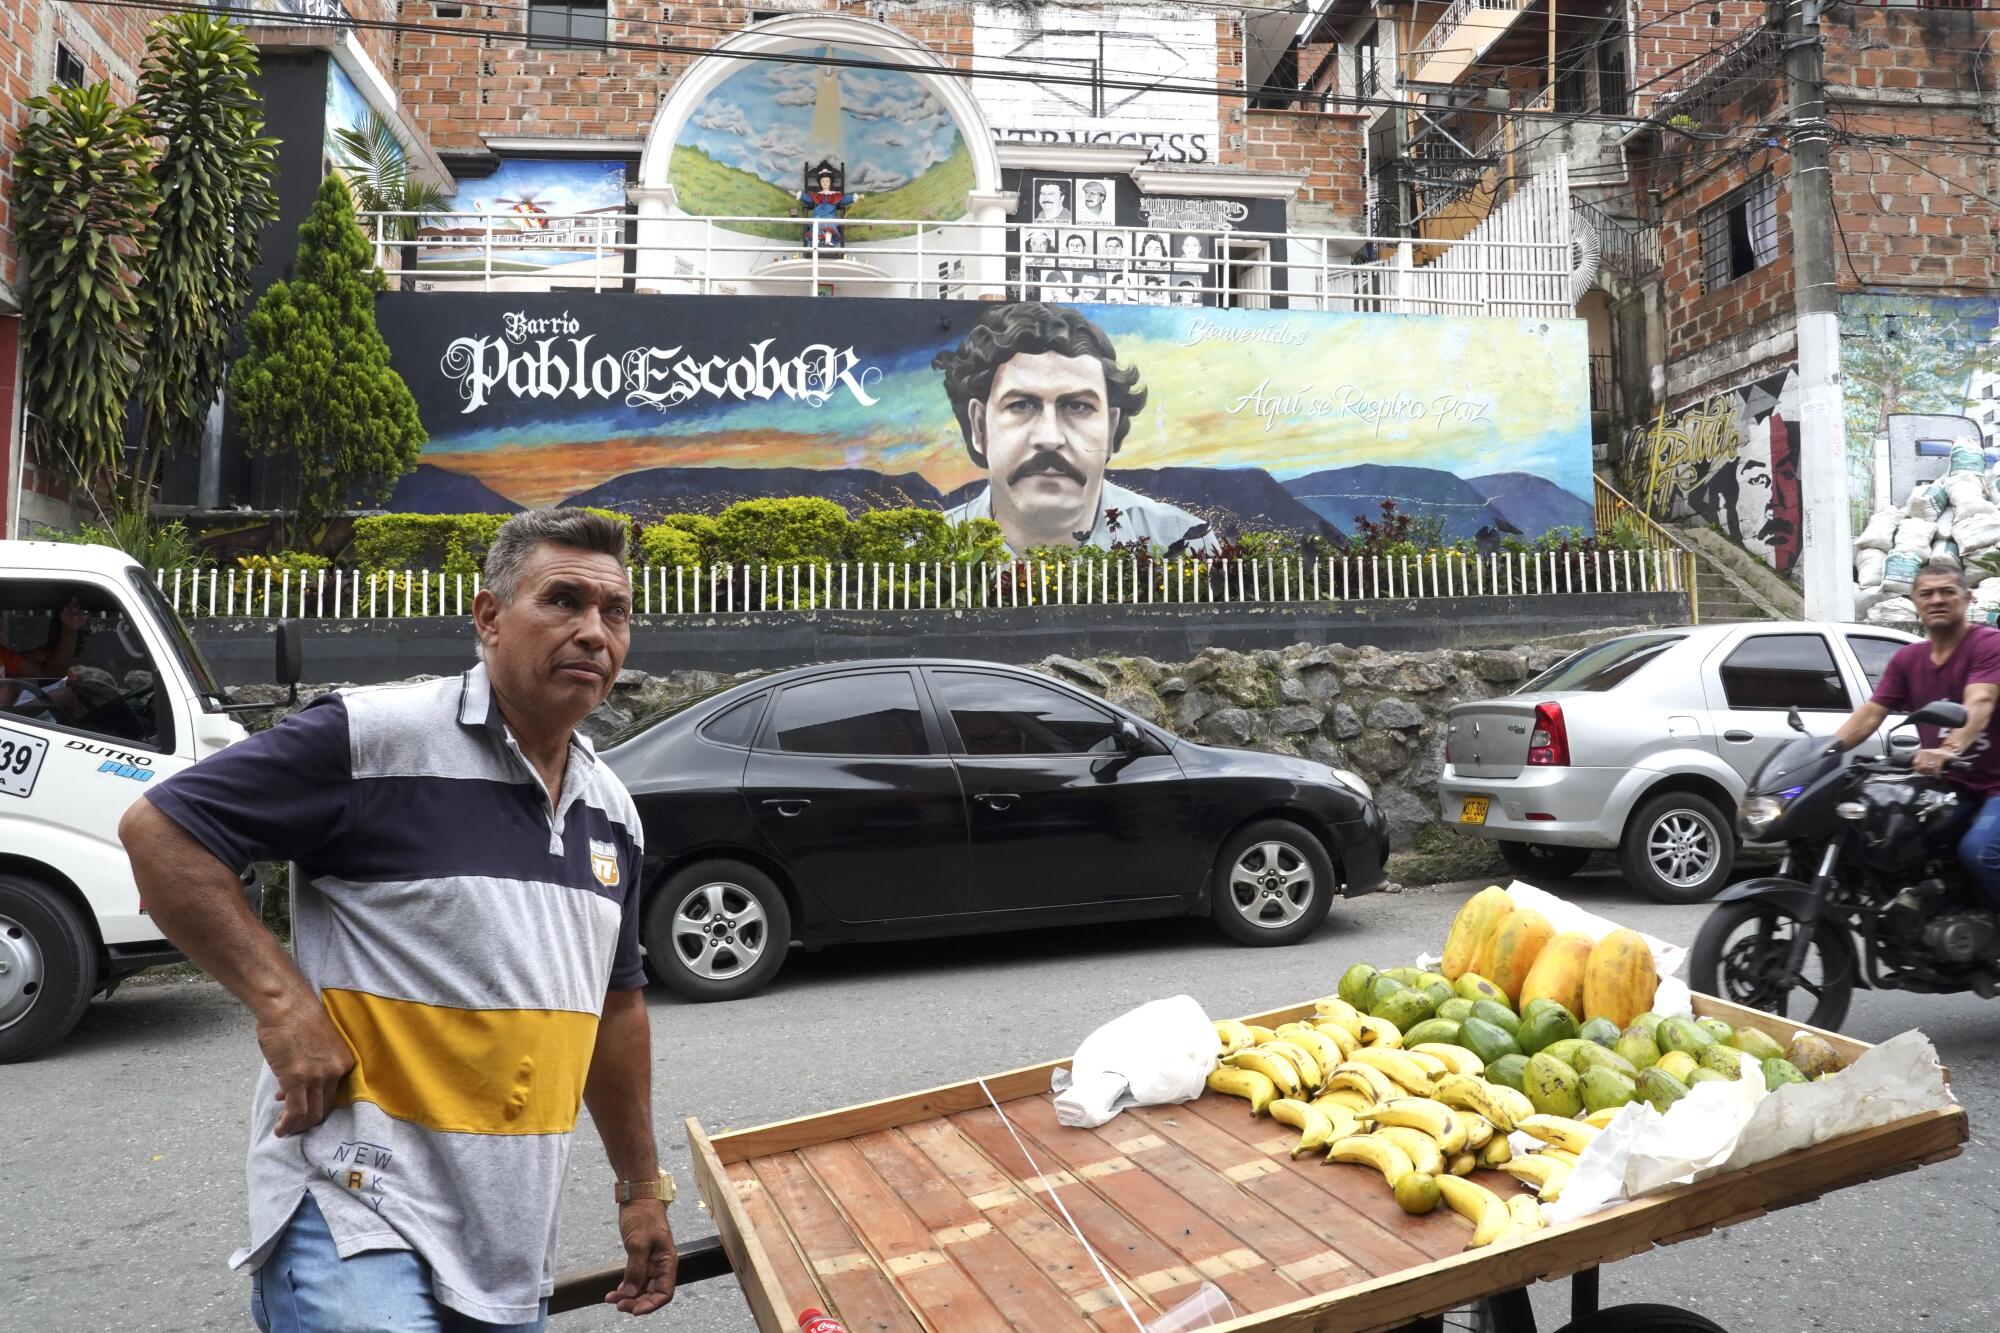 Man sells food in front of a mural.